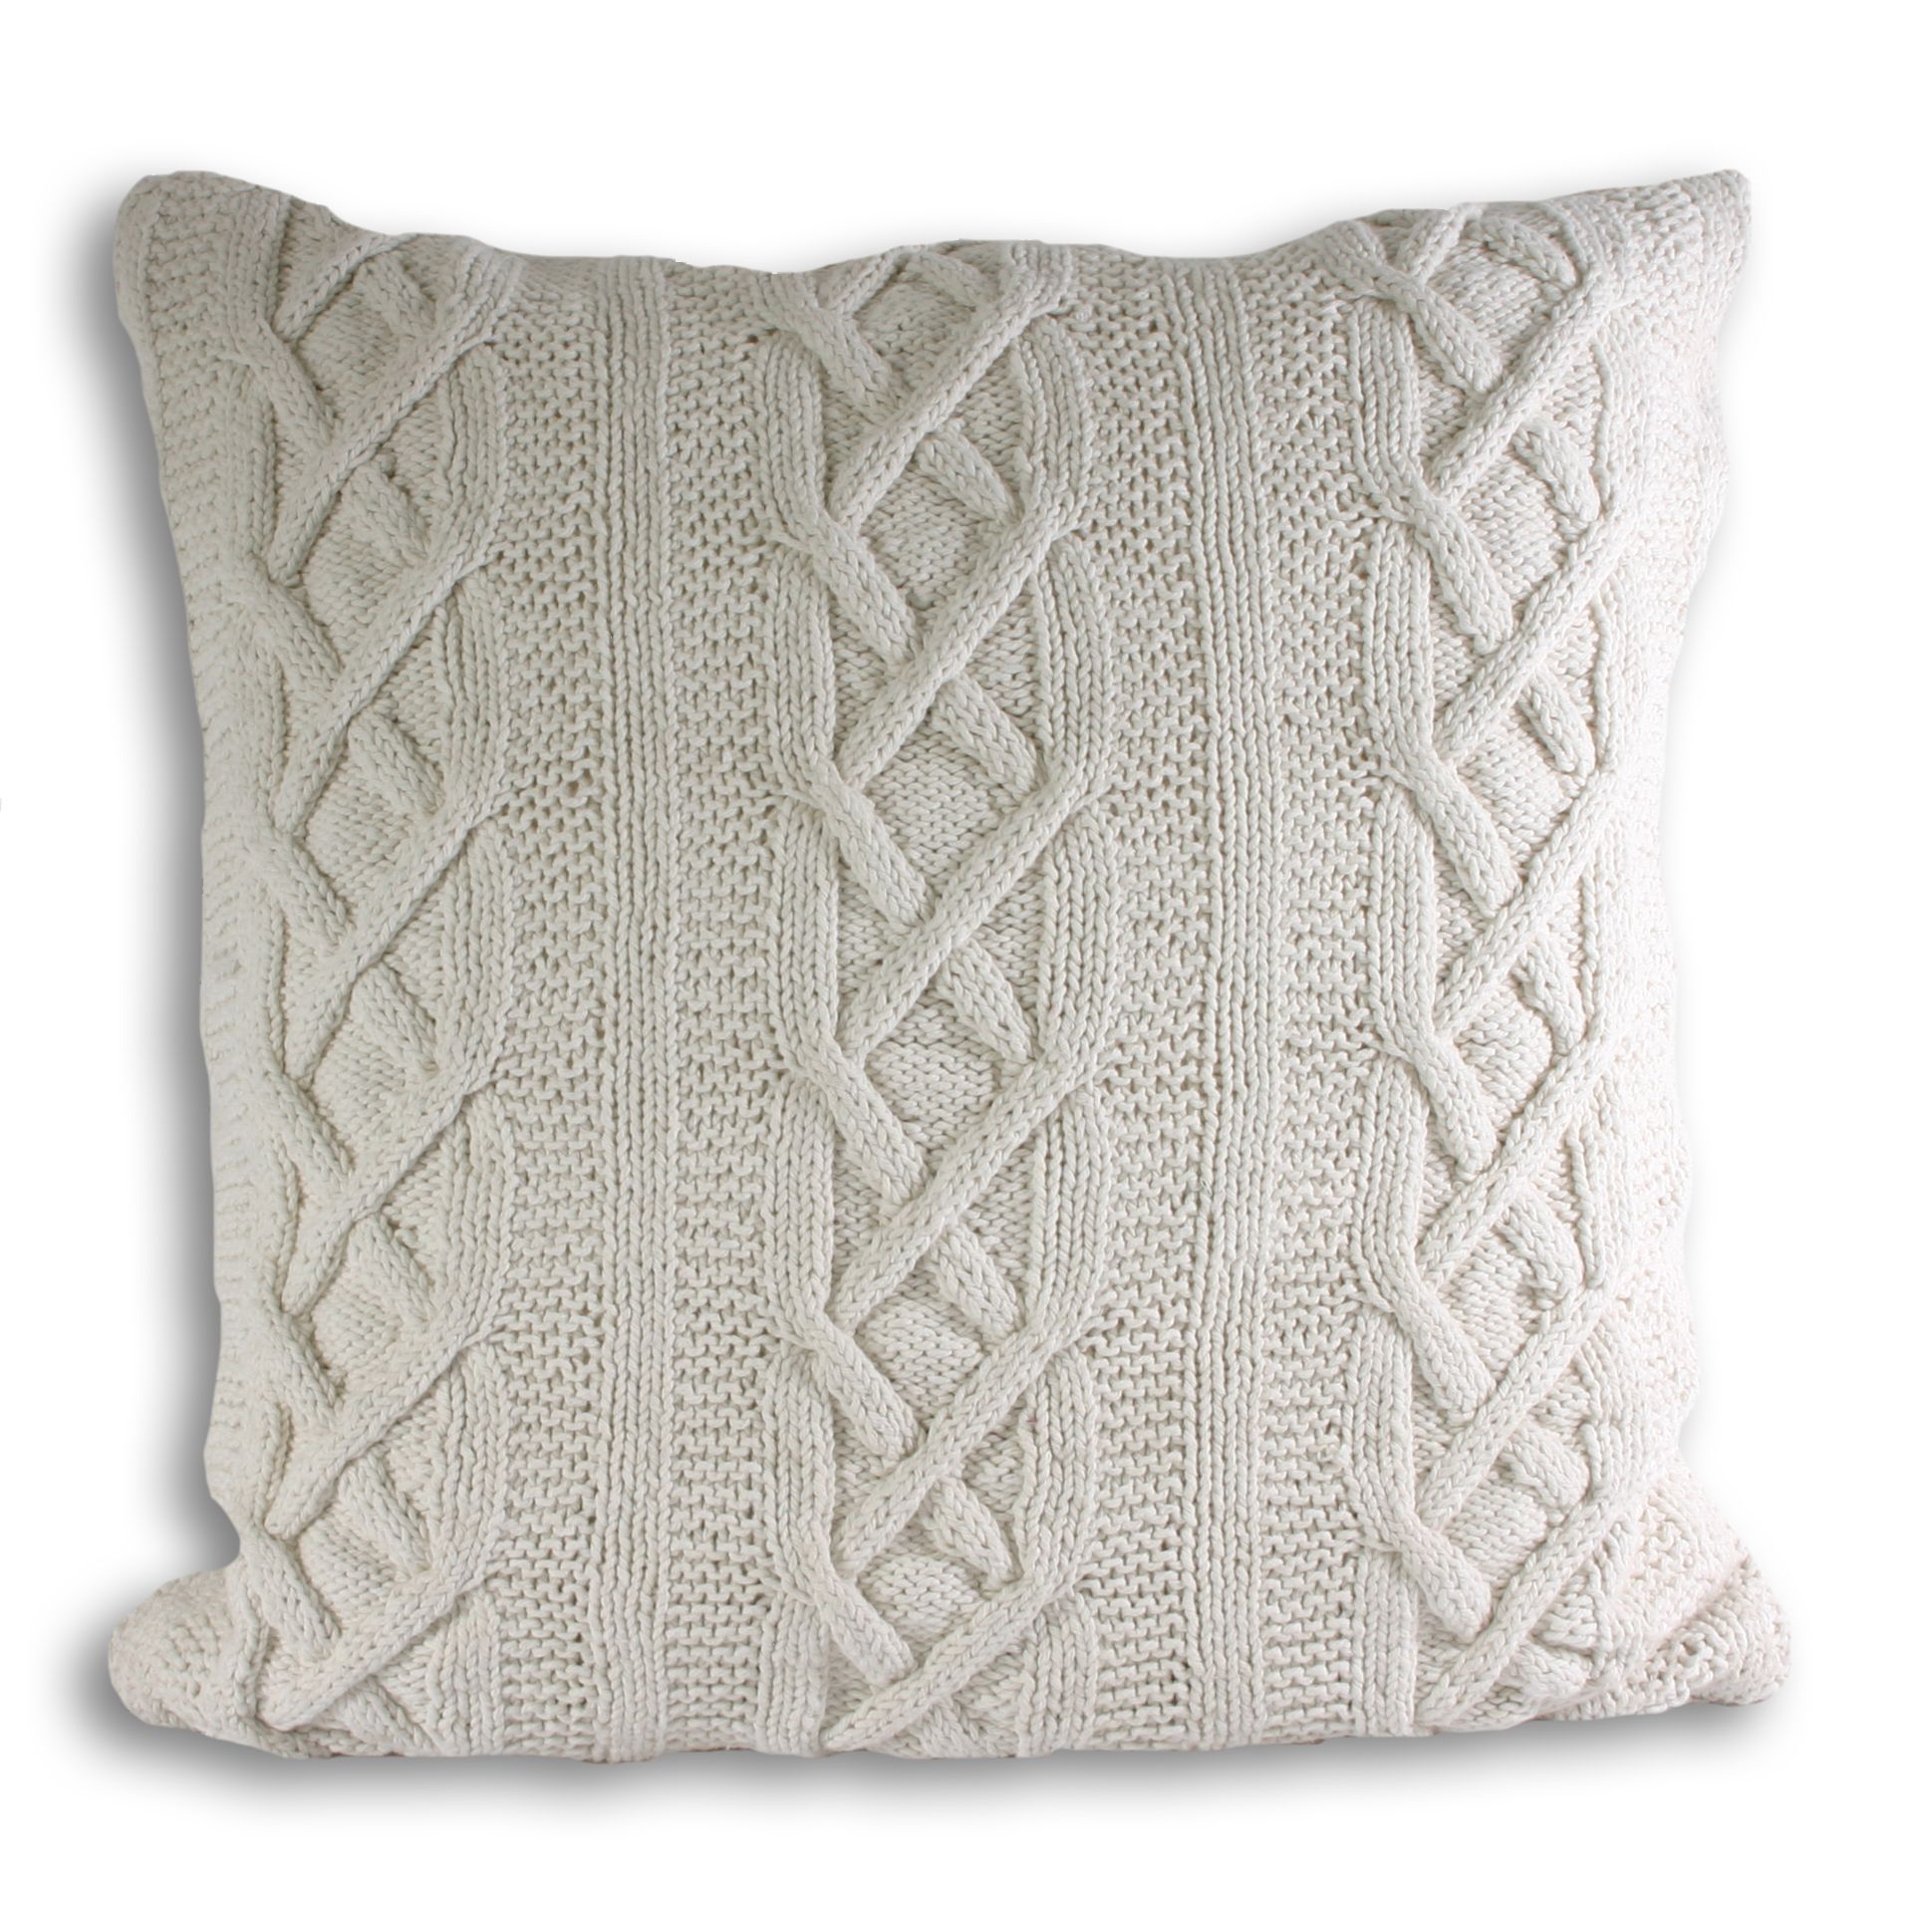 The Aran Polyester Filled Cushion is a modern interpretation of a classic look. This gorgeous cushion features a chunky, cable knit design that adds unique textures to your home interior, bringing a traditional twist into a modern setting or matching a cottage-style theme. With a hidden zip design this cushion will not catch and has a plain cream reverse. Thanks to its 100% cotton weave this Polyester Filled Cushion is super soft to touch making it great for beds. It must be hand washed only and laid flat to dry. Made to match with the Aran cable knit throws in corresponding natural colours.